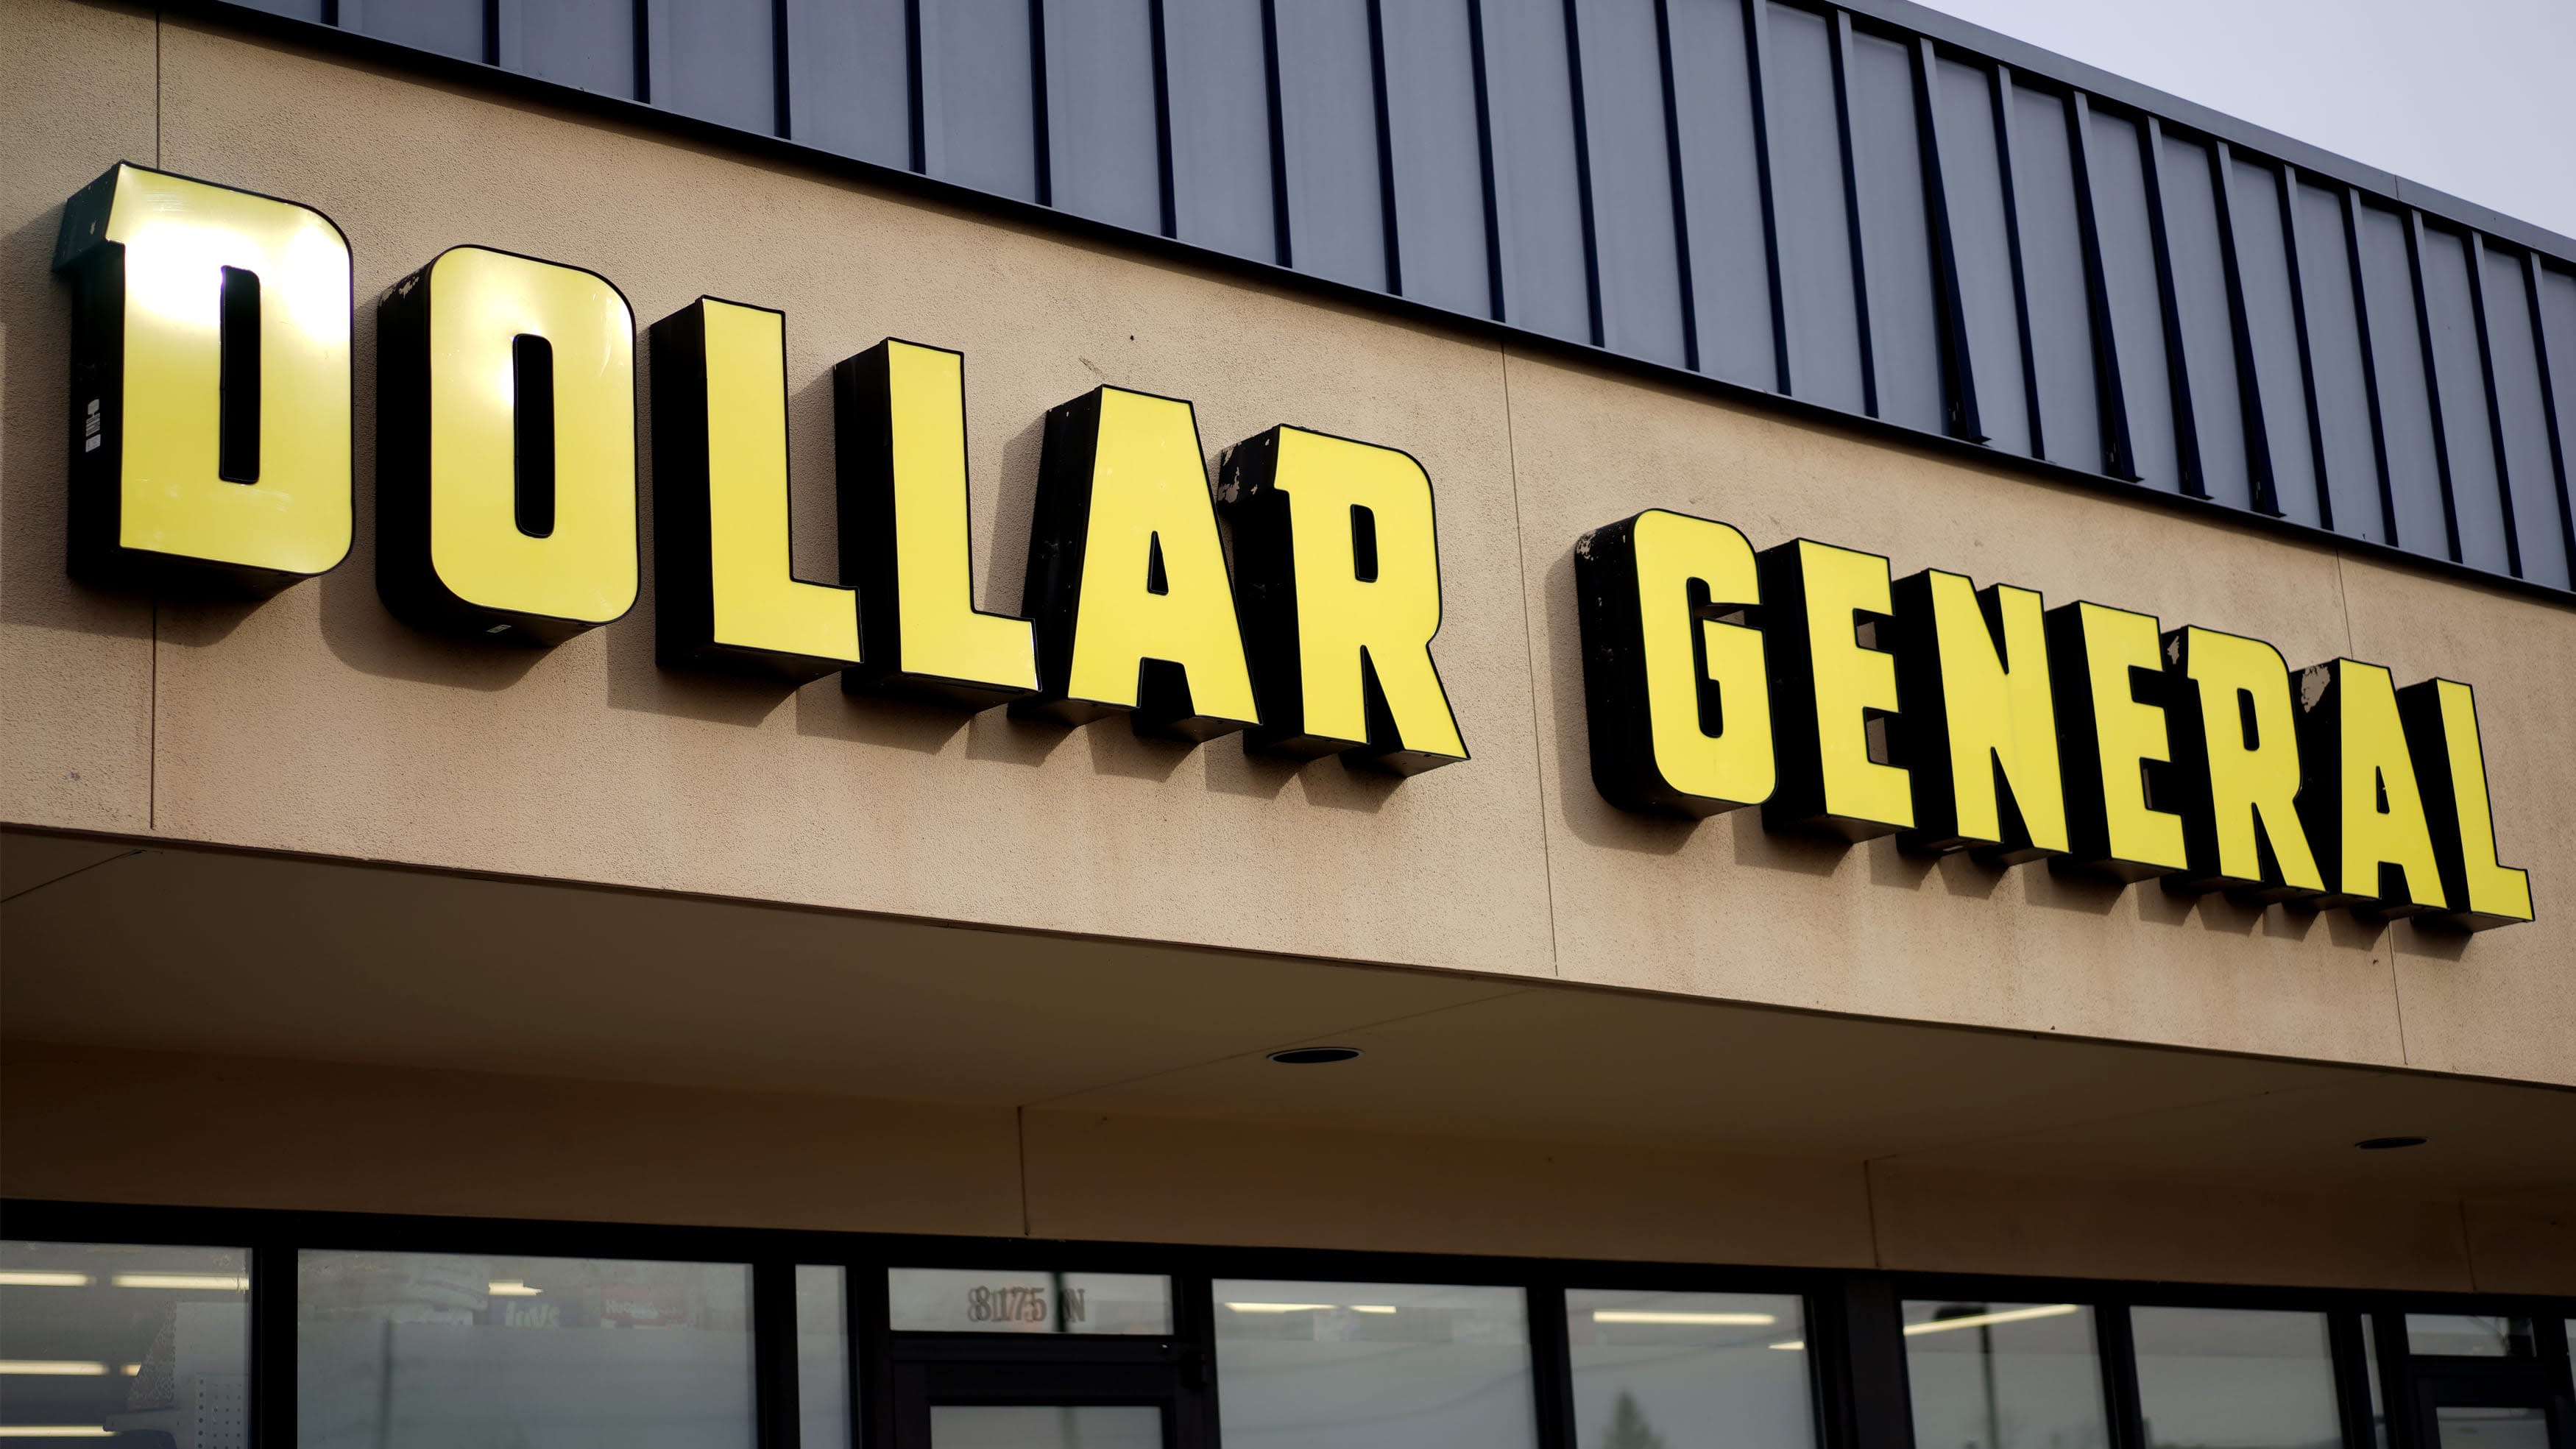 Dollar General Employees Say It's a Terrible Place to Work - Bloomberg